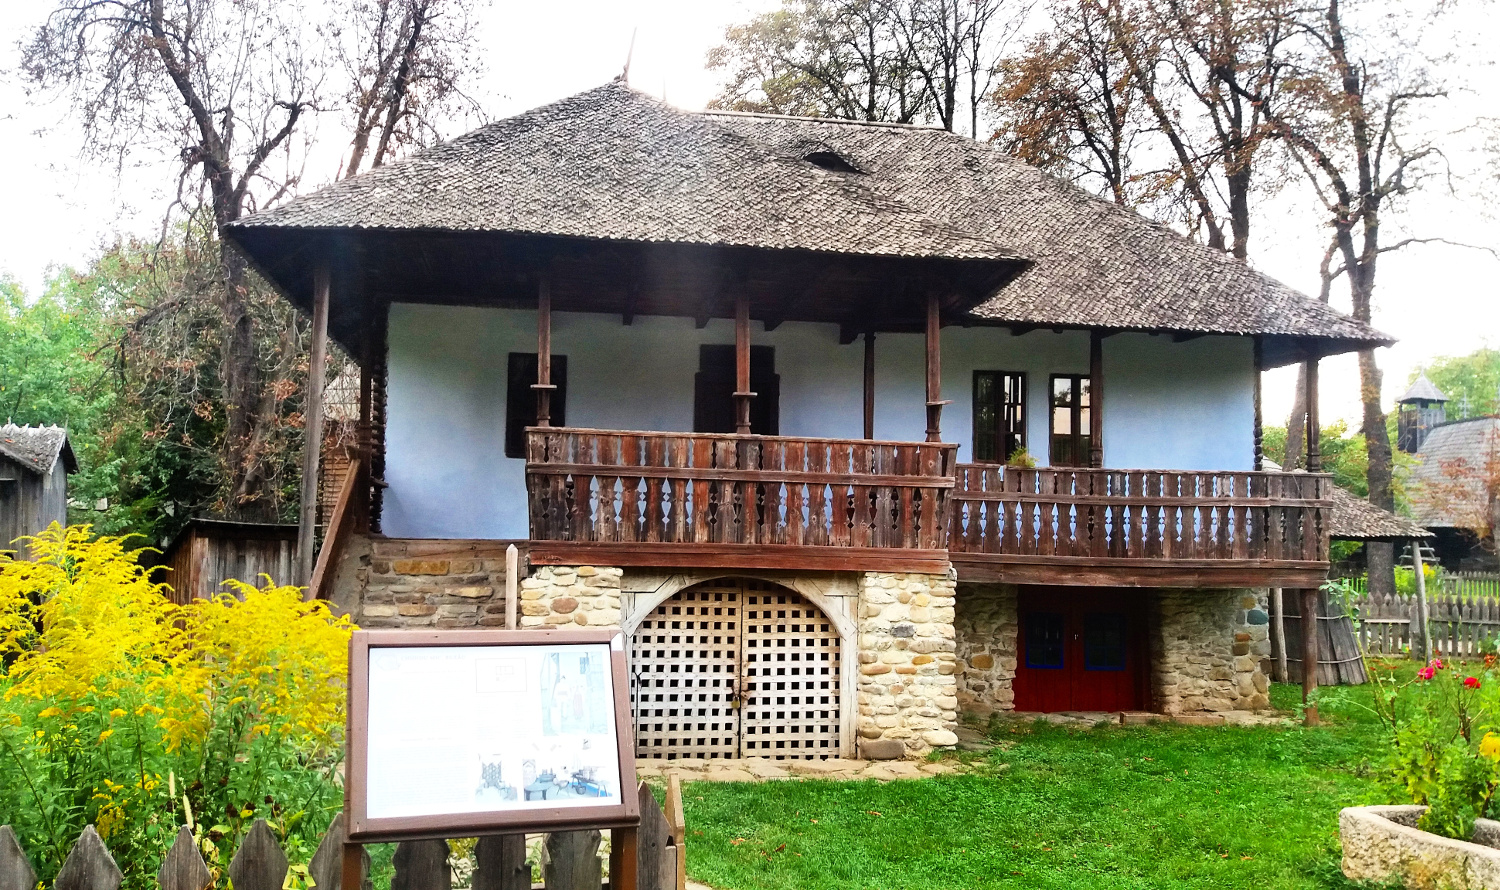 The house on the 10 Lei bill - the Village Museum Bucharest